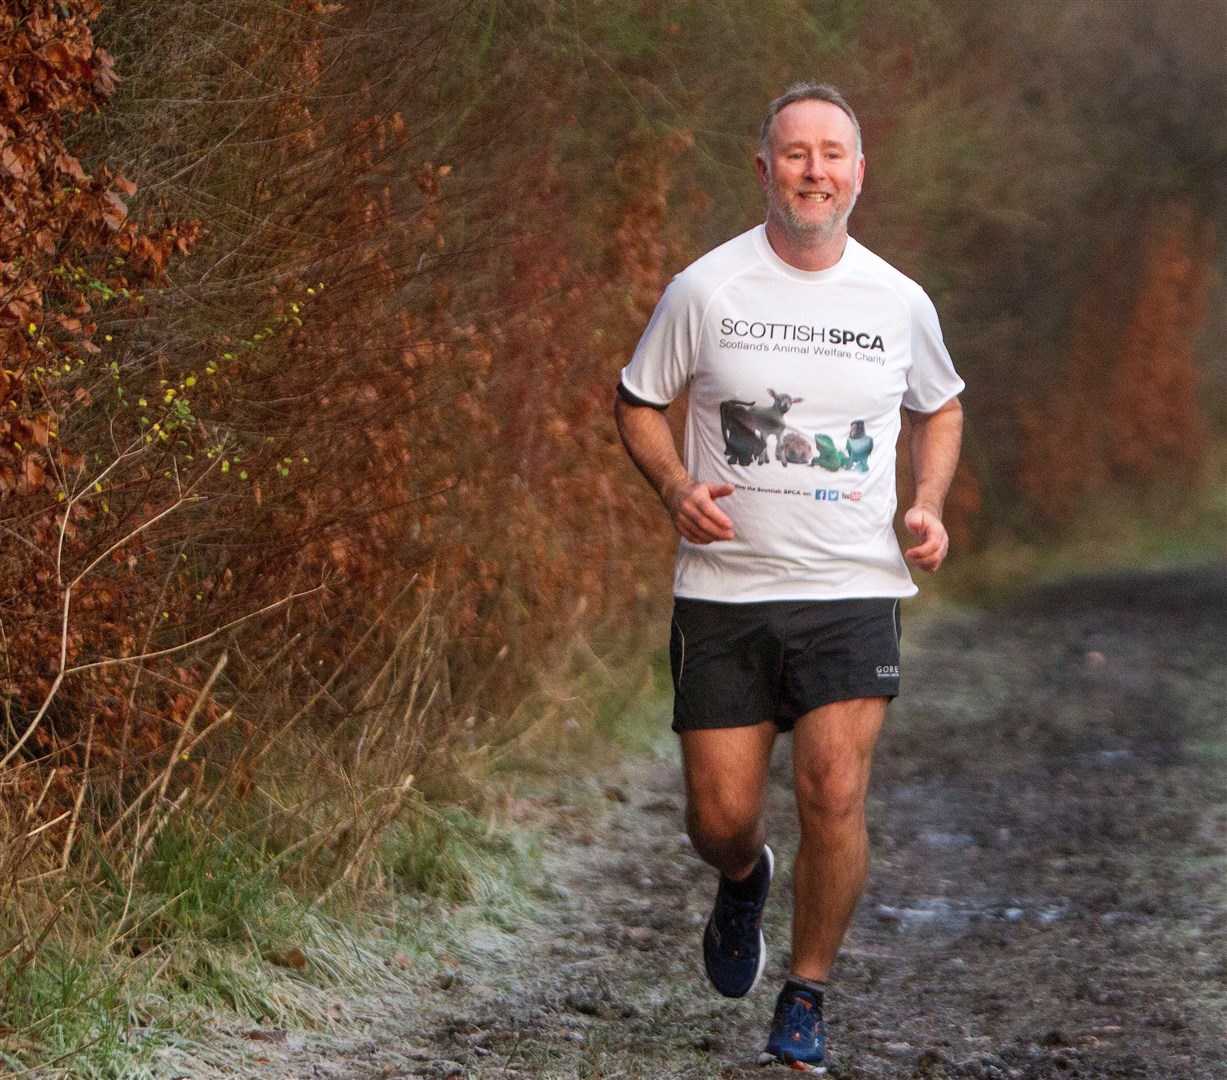 Ian Russell goes on the run for the animal welfare charity. The Scottish SPCA hopes others will follow his example for the Great Wilderness Challenge.